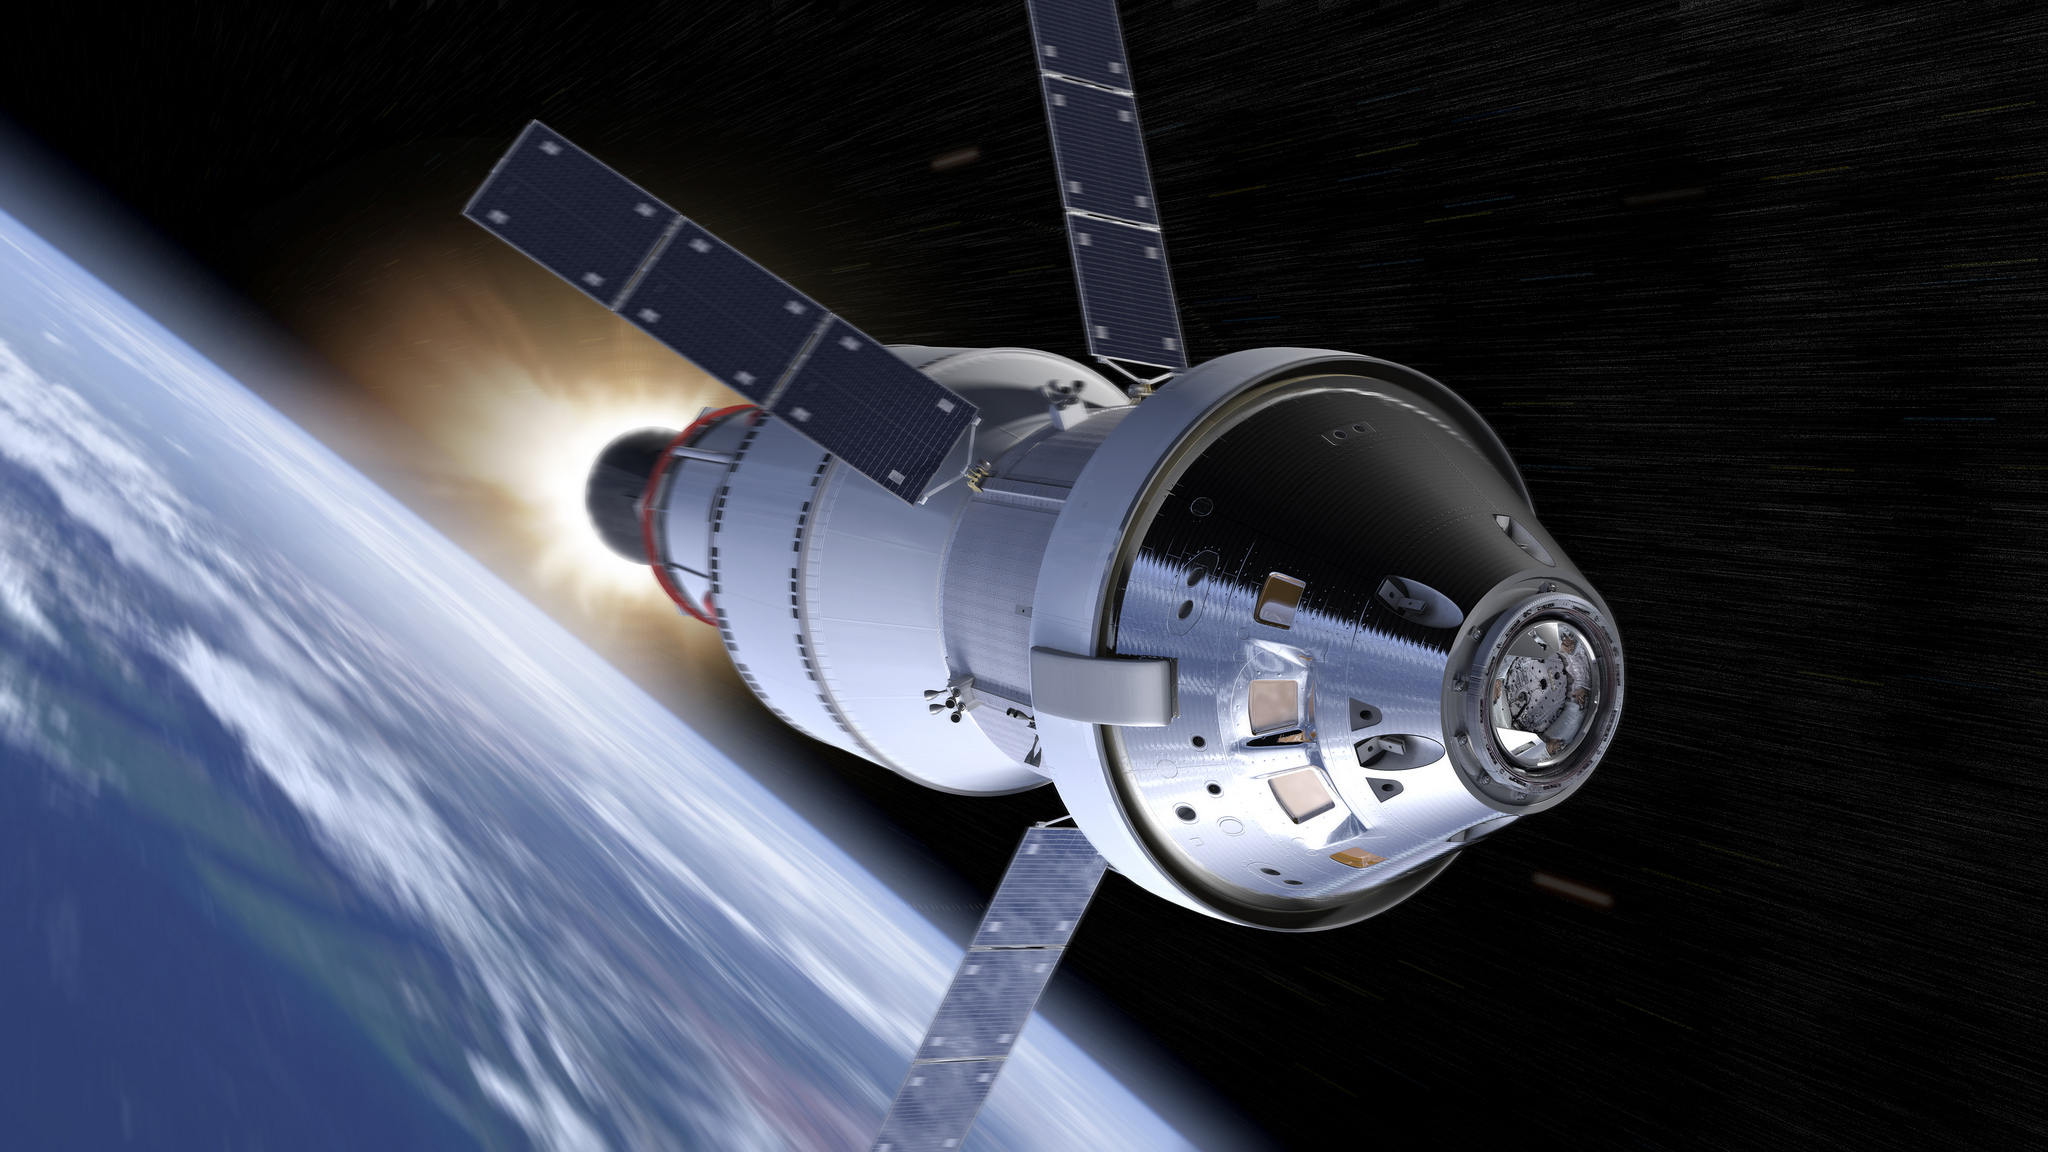 Orion spacecraft with Earth in background